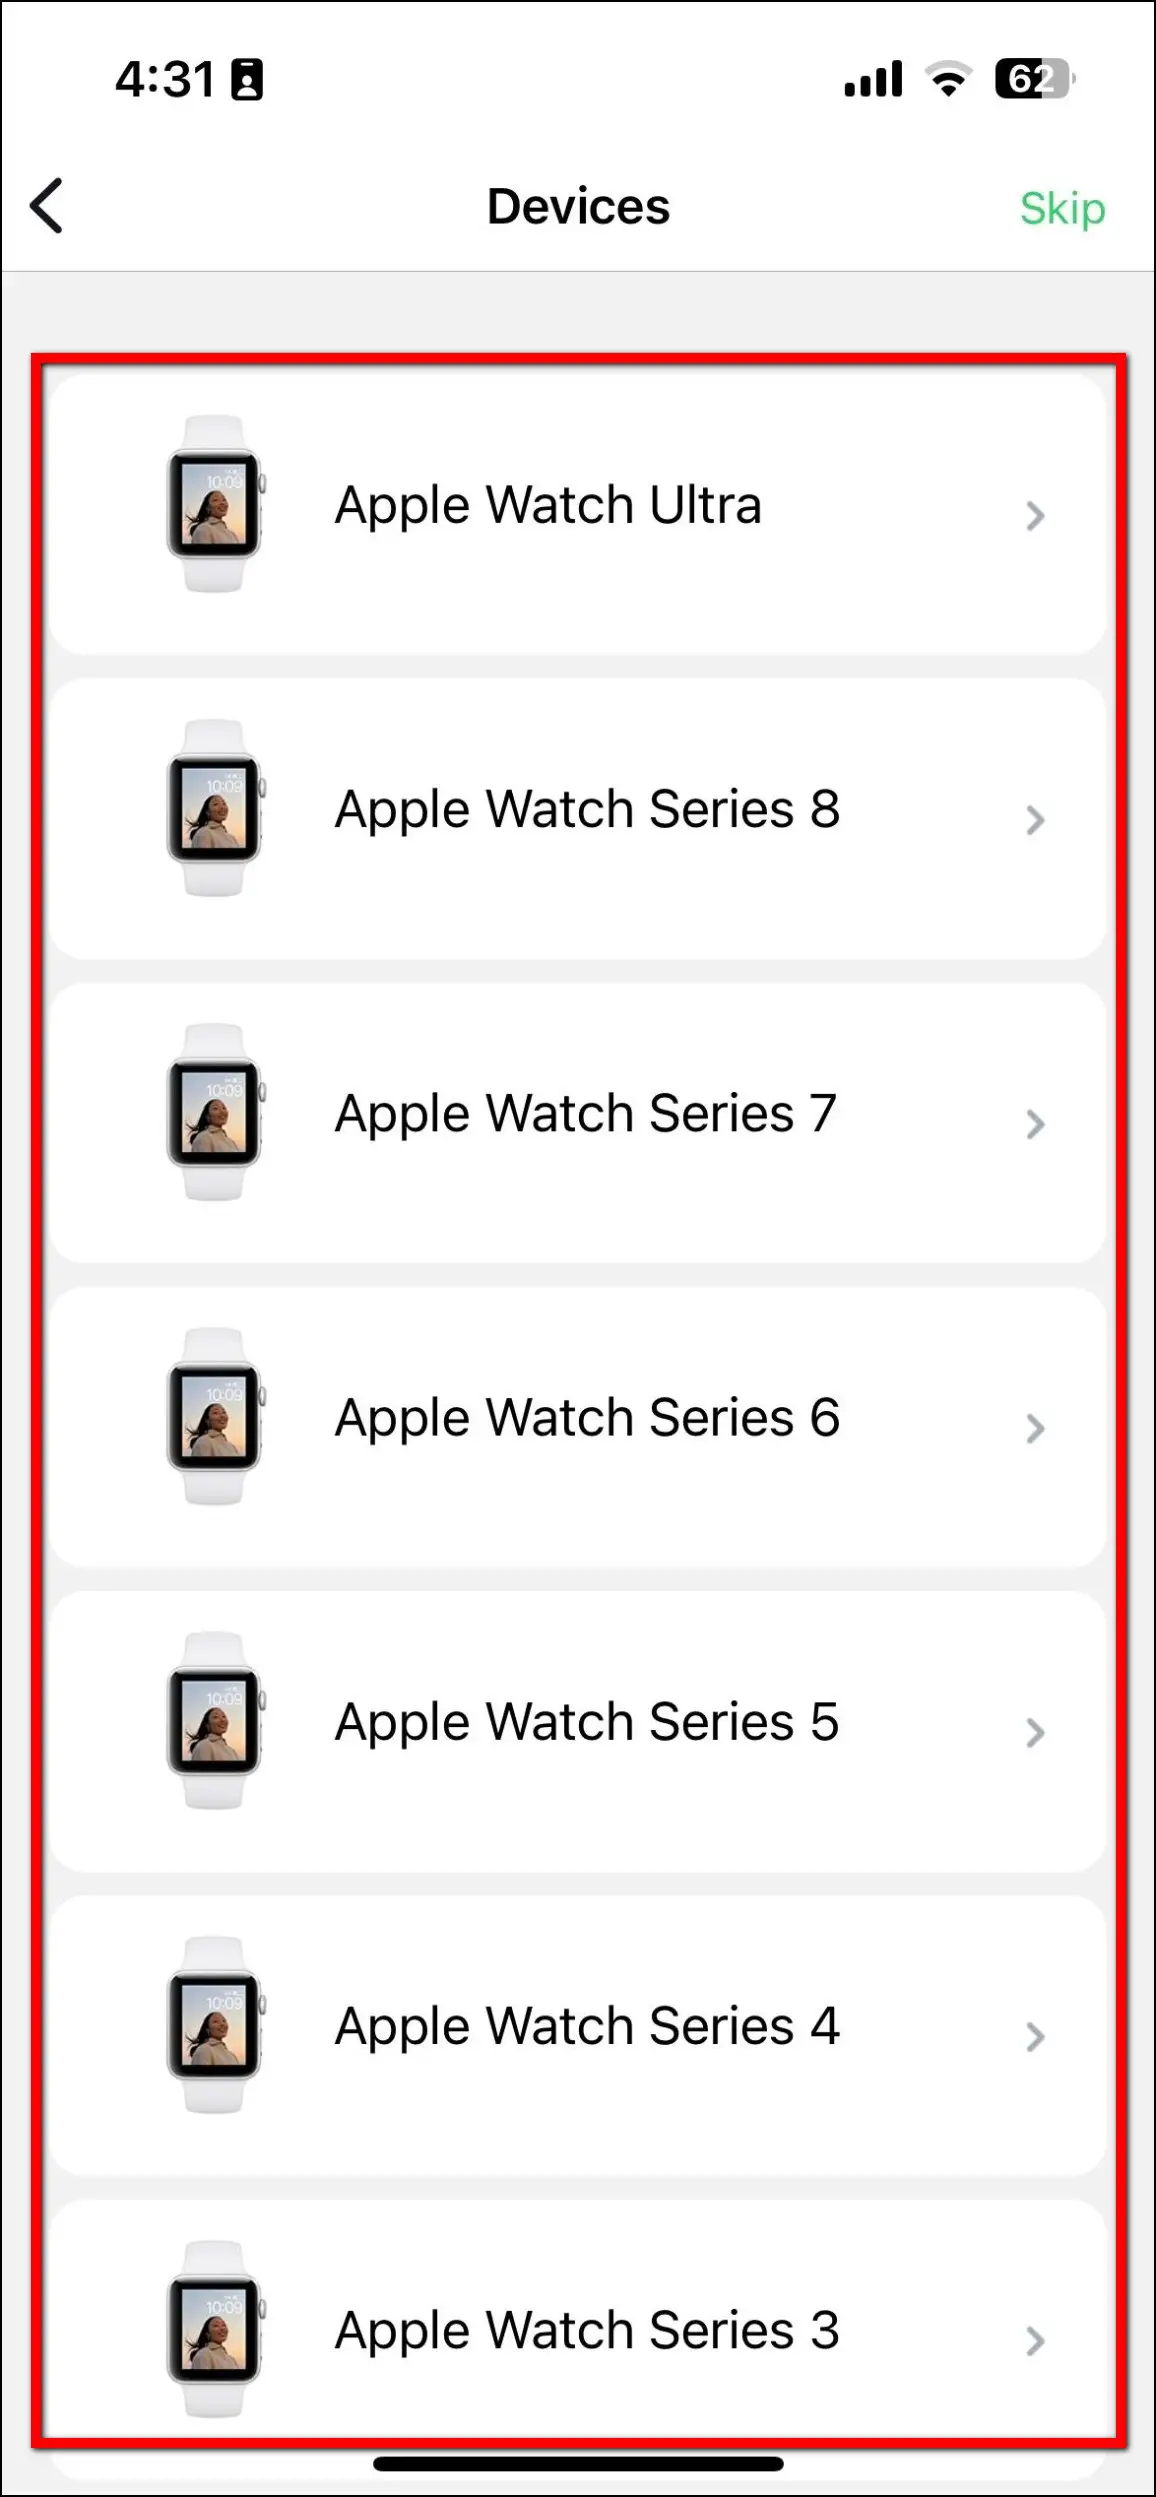 TicWatch TimeShow App for iPhone